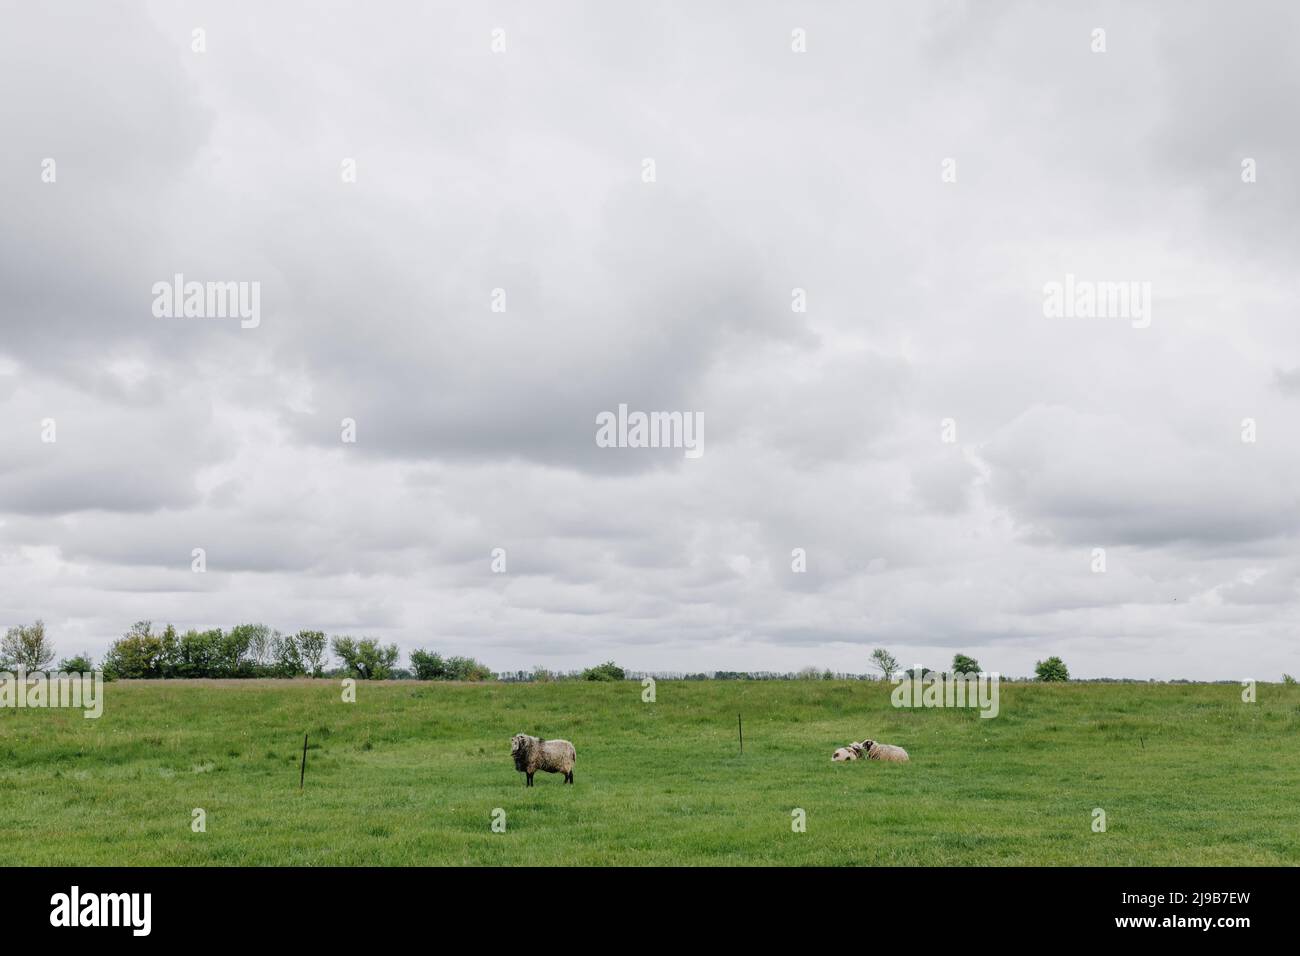 Three fluffy sheep in a grassy field on green grass in cloudy spring weather. High quality photo Stock Photo